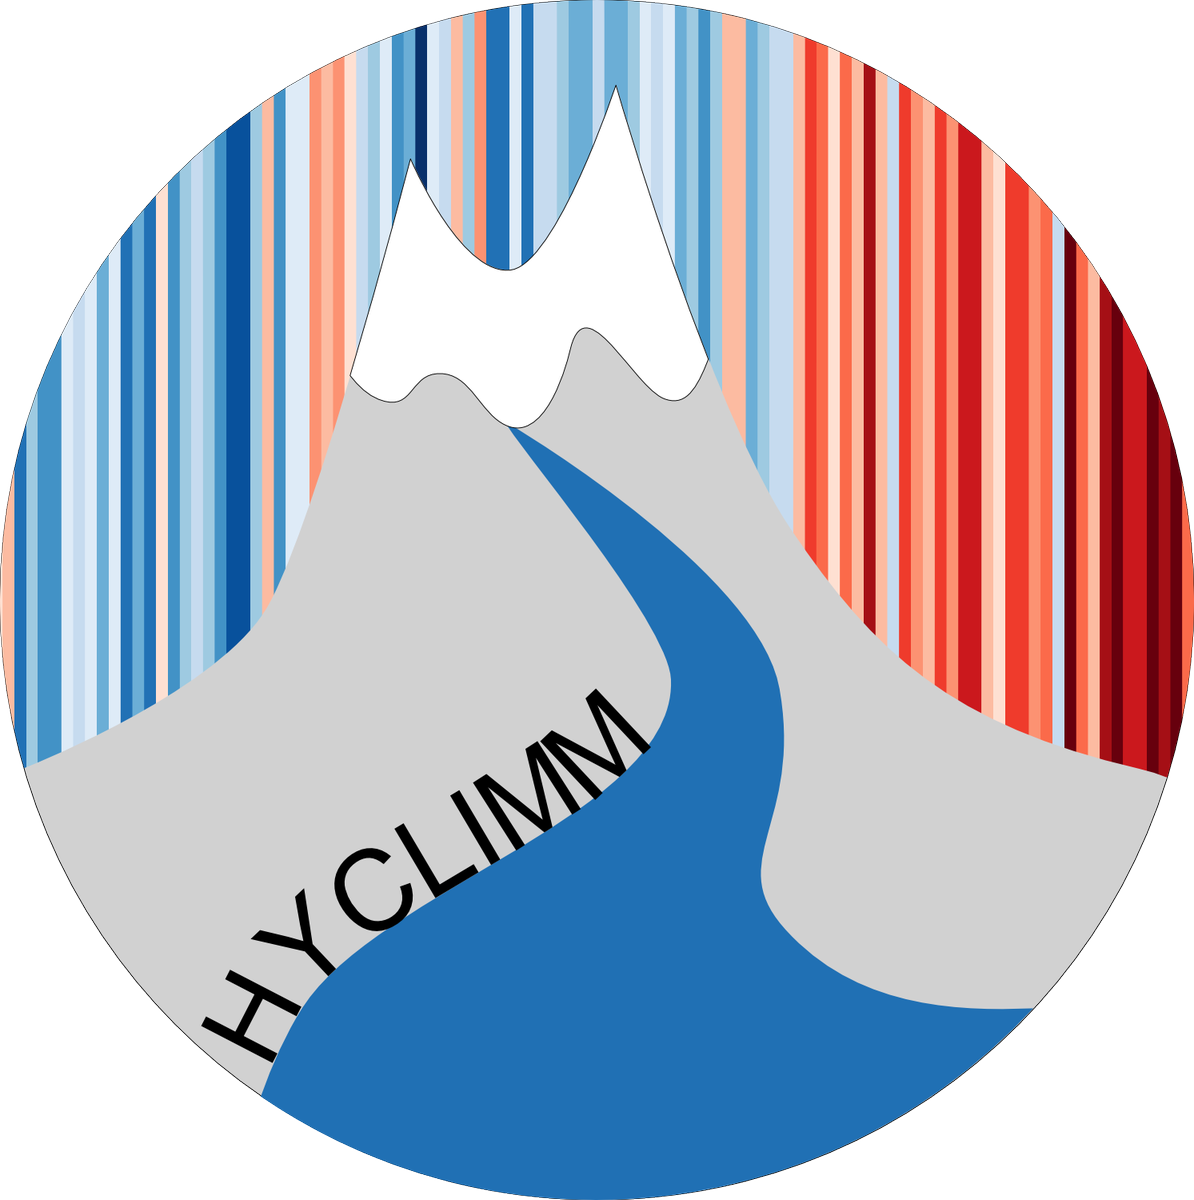 My Hydrology and Climate Impacts group at @SLFDavos and @ETH_en is offering two exciting positions on climate/hydrologic extremes: 1) Postdoc position in compound climate/hydrologic extremes: apply.refline.ch/273855/1601/pu… 2) PhD position in riverine heatwaves: apply.refline.ch/273855/1601/pu…